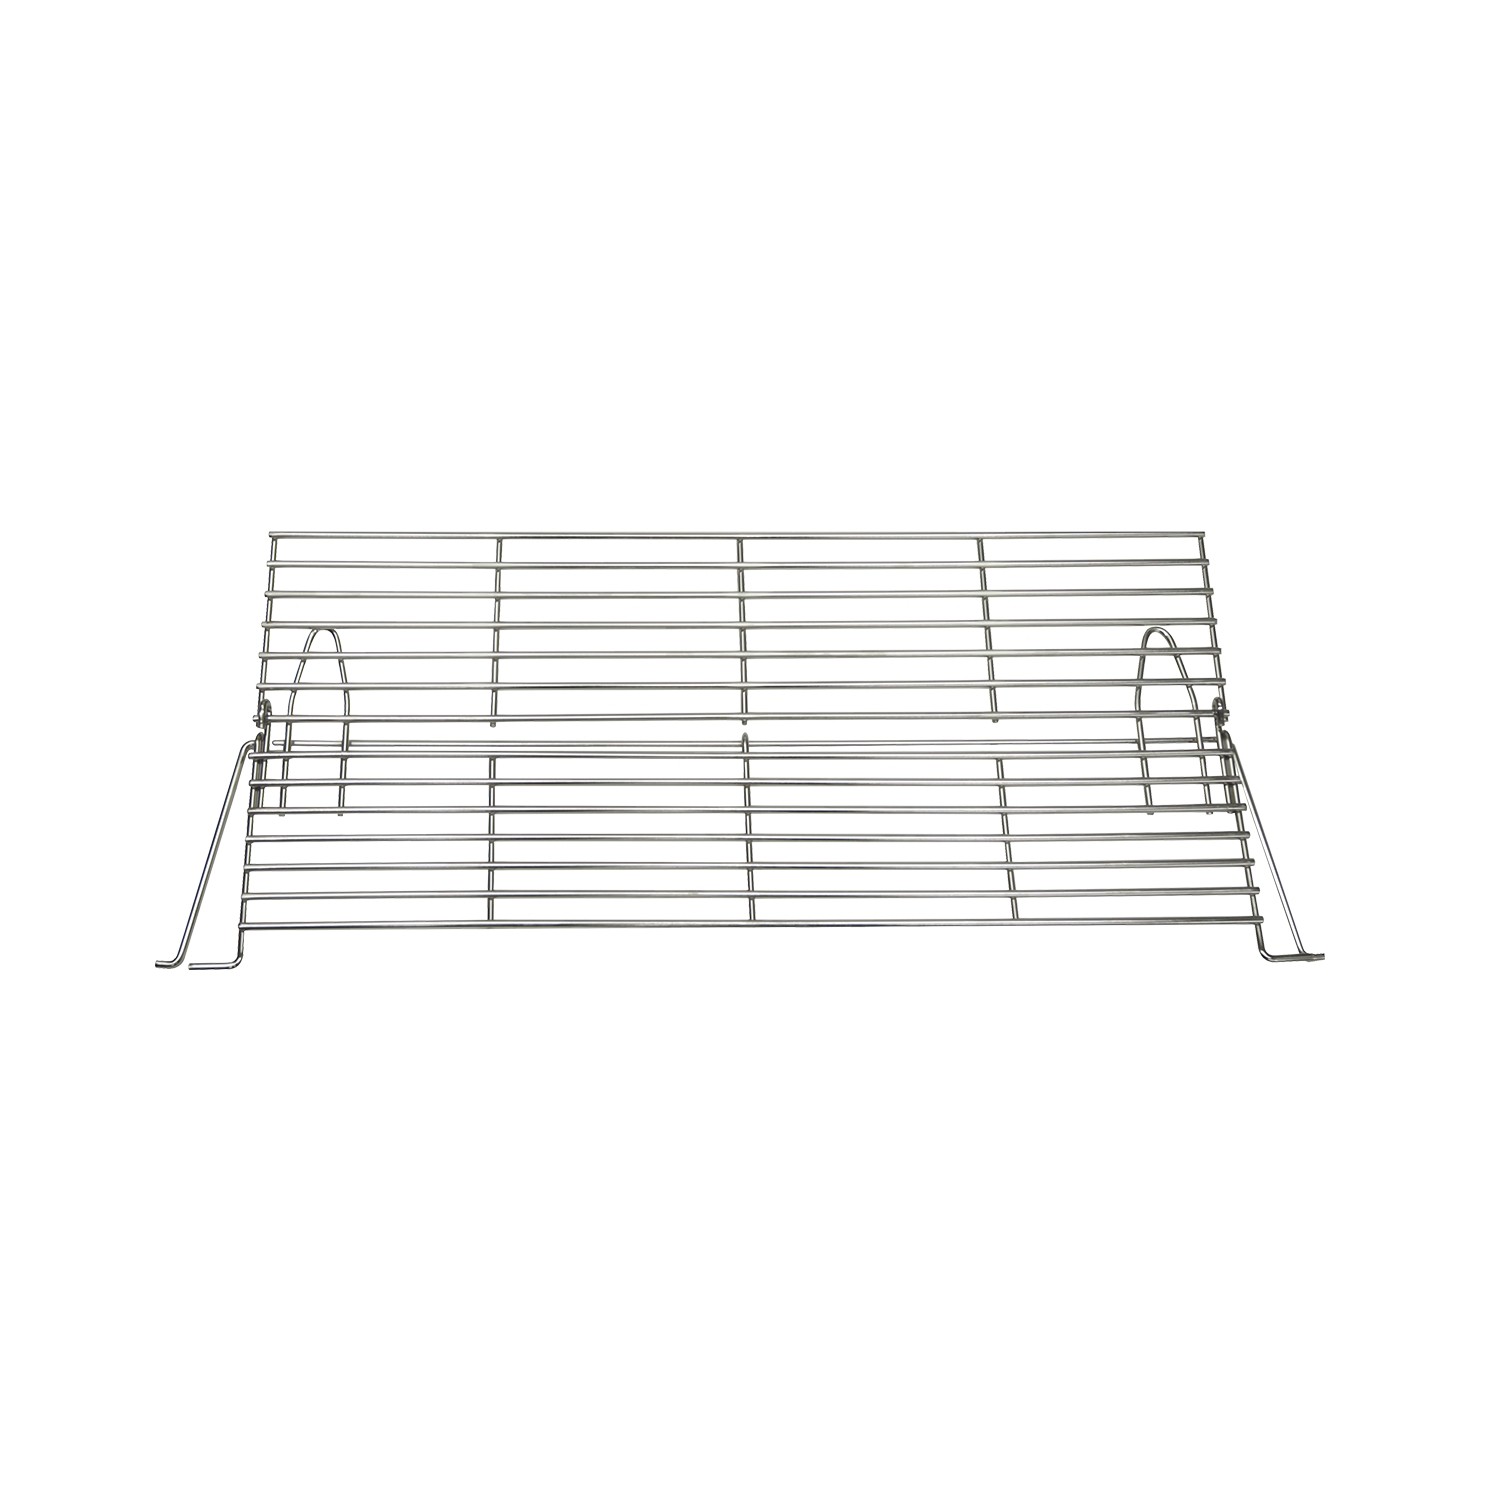 BROILMASTER B072695 STAINLESS STEEL RETRACT-A-RACK WITH FOLD-OUT FOR C3, Q3, P3, R3, T3, D3